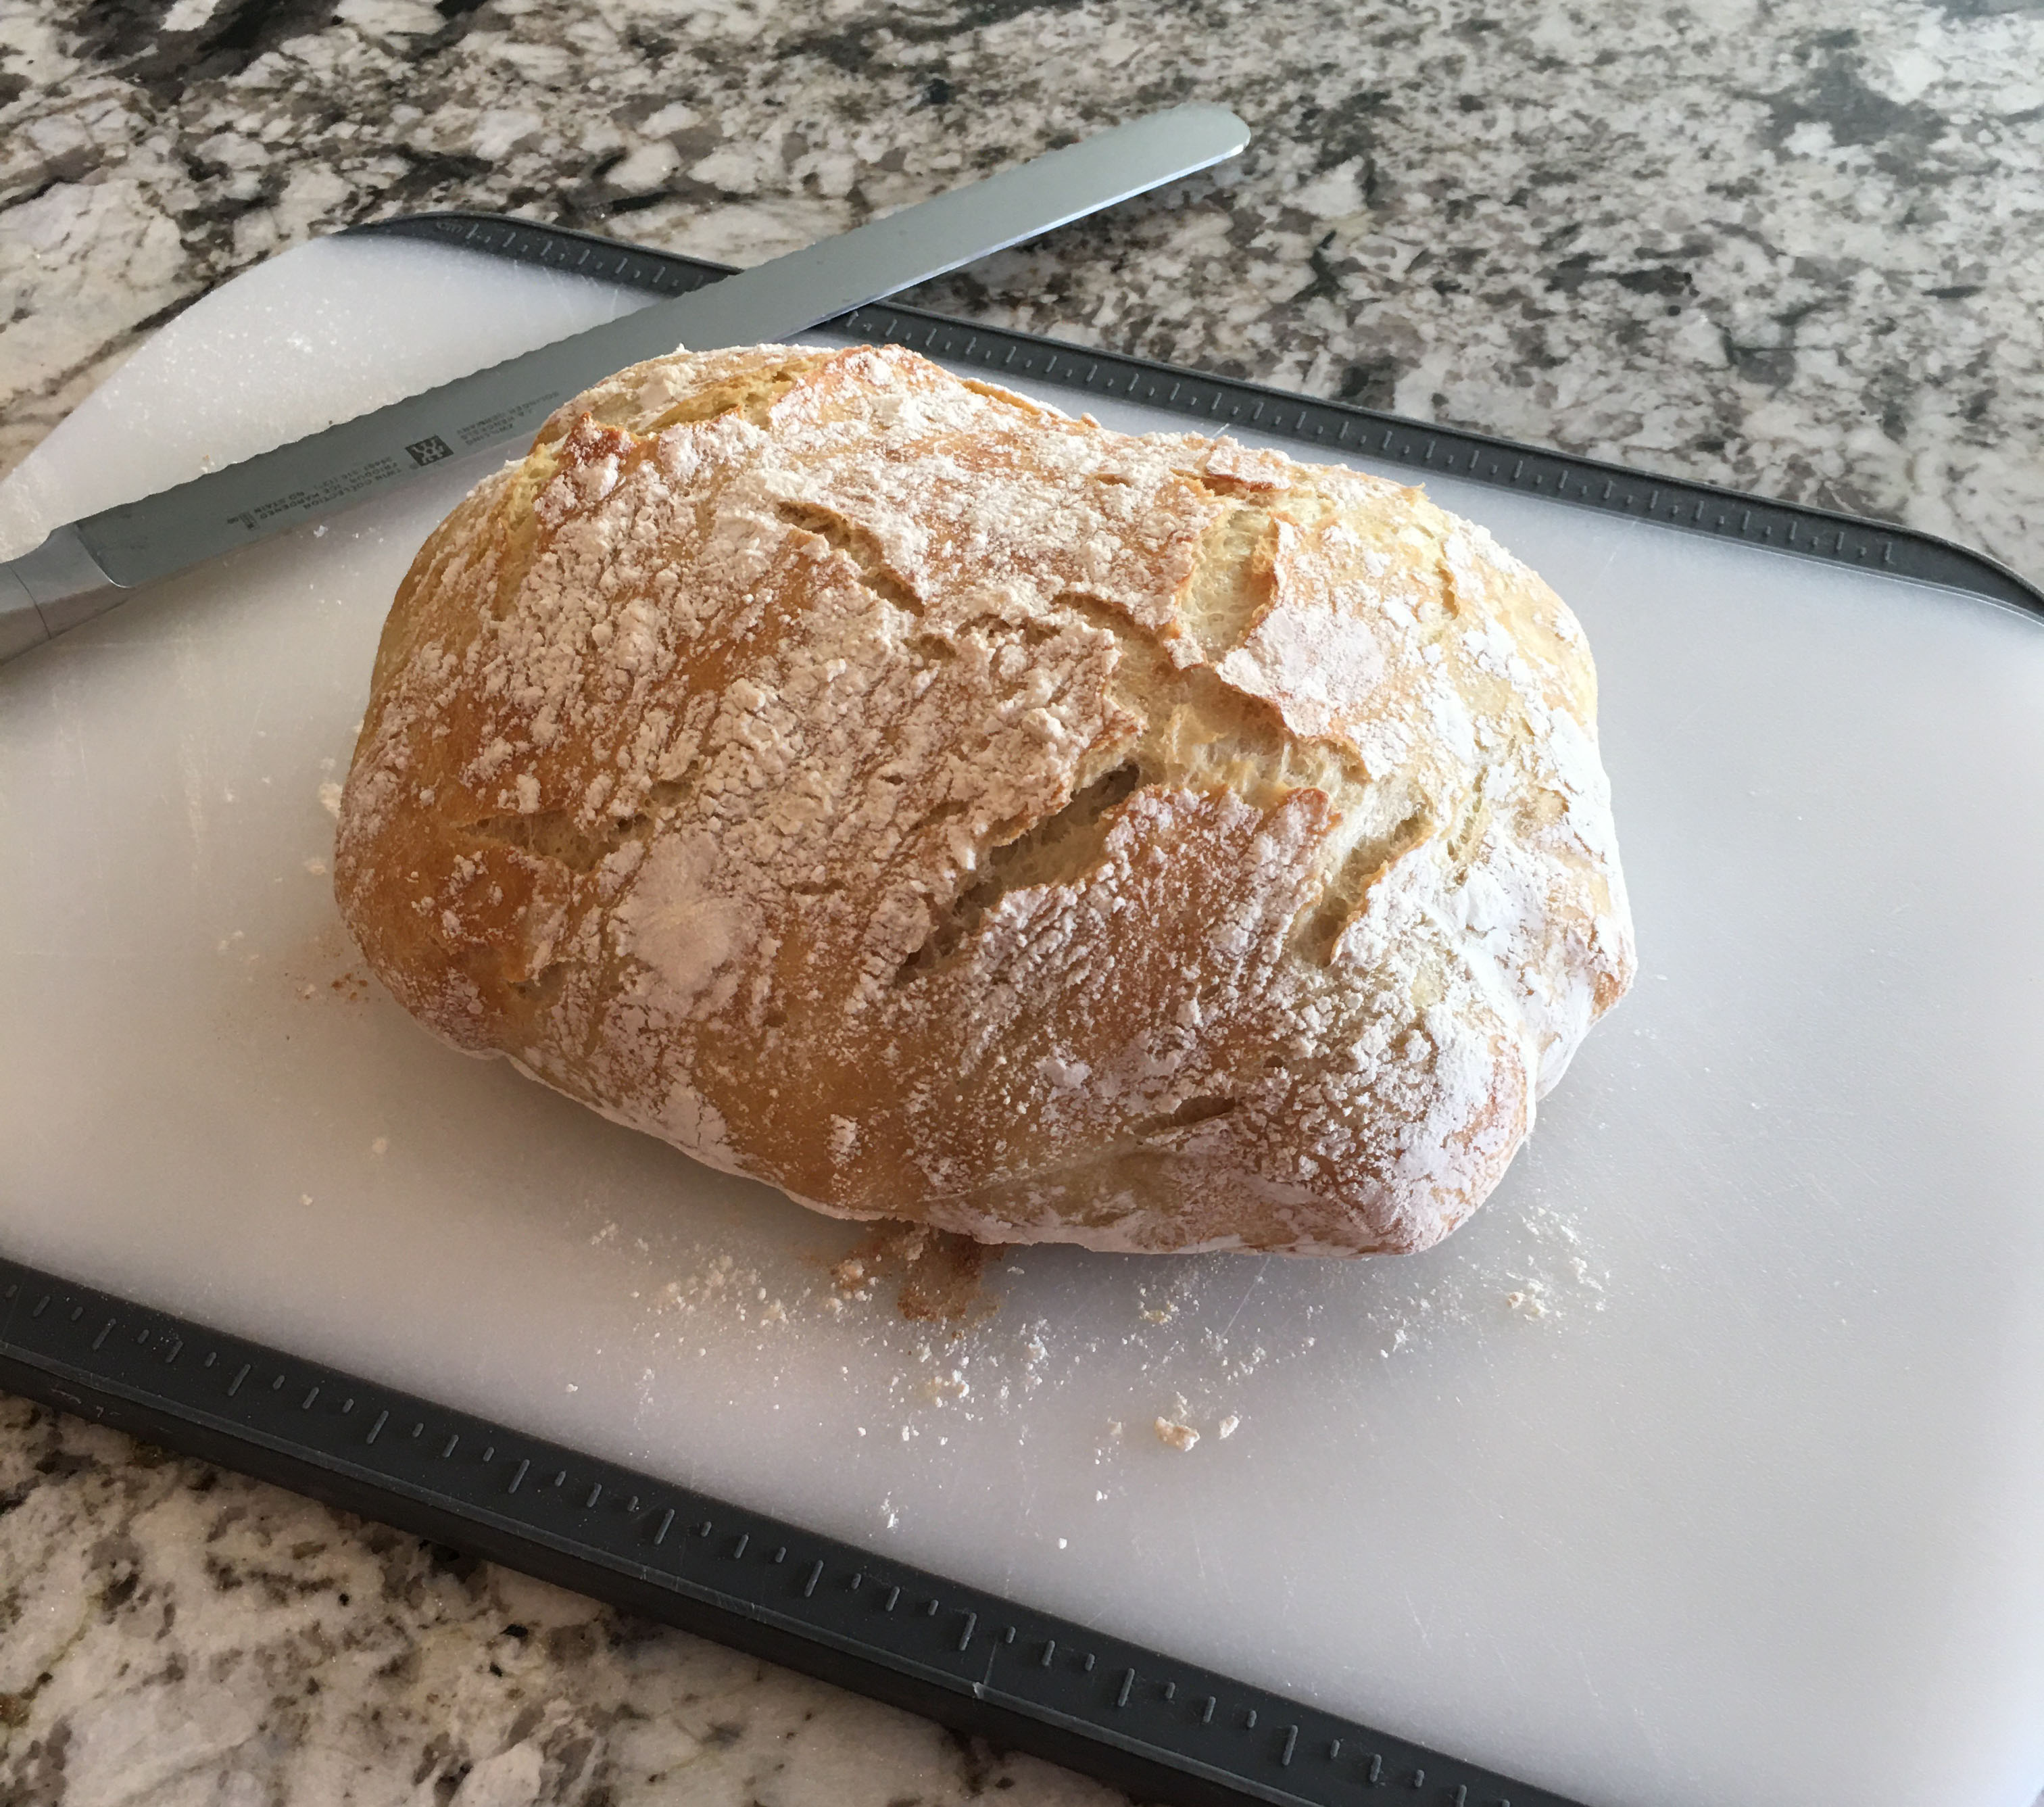 A loaf of bread made with this recipe